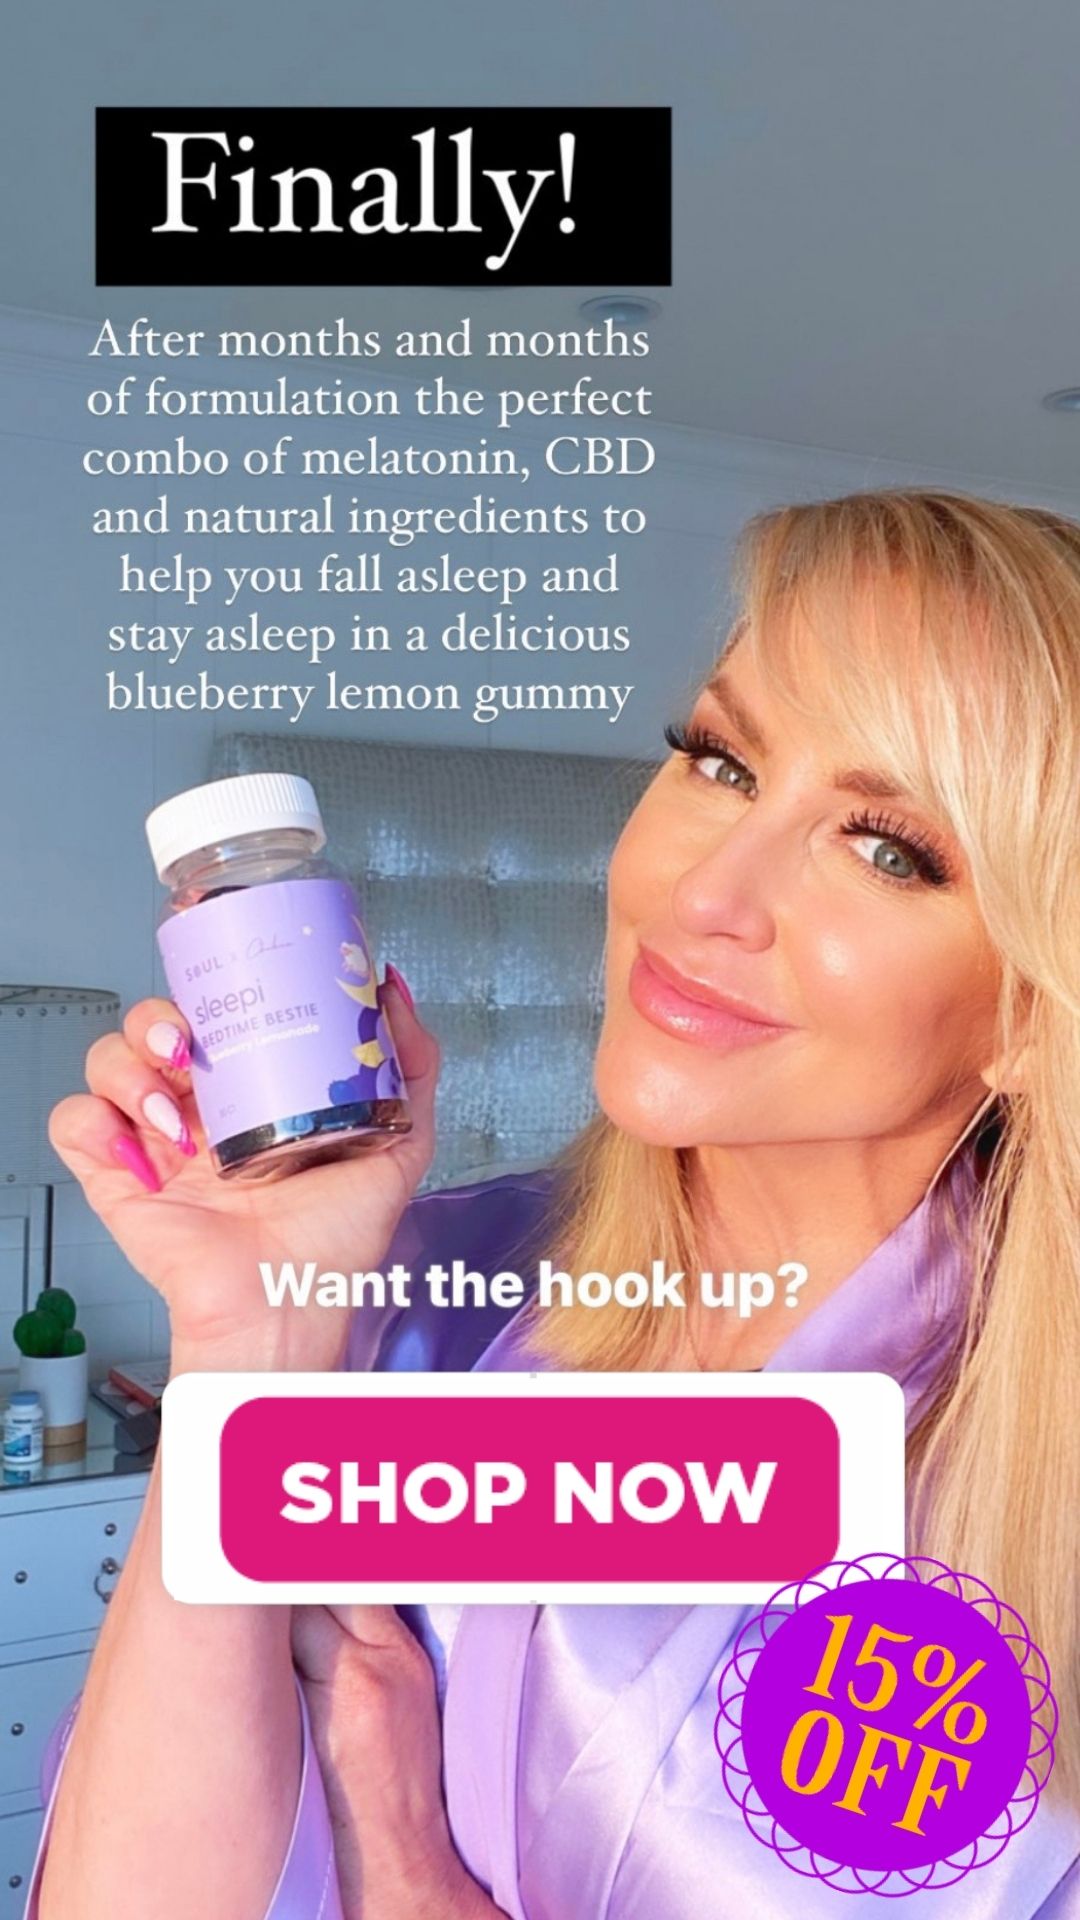 Chalene Johnson holding a jar of pills in her hand